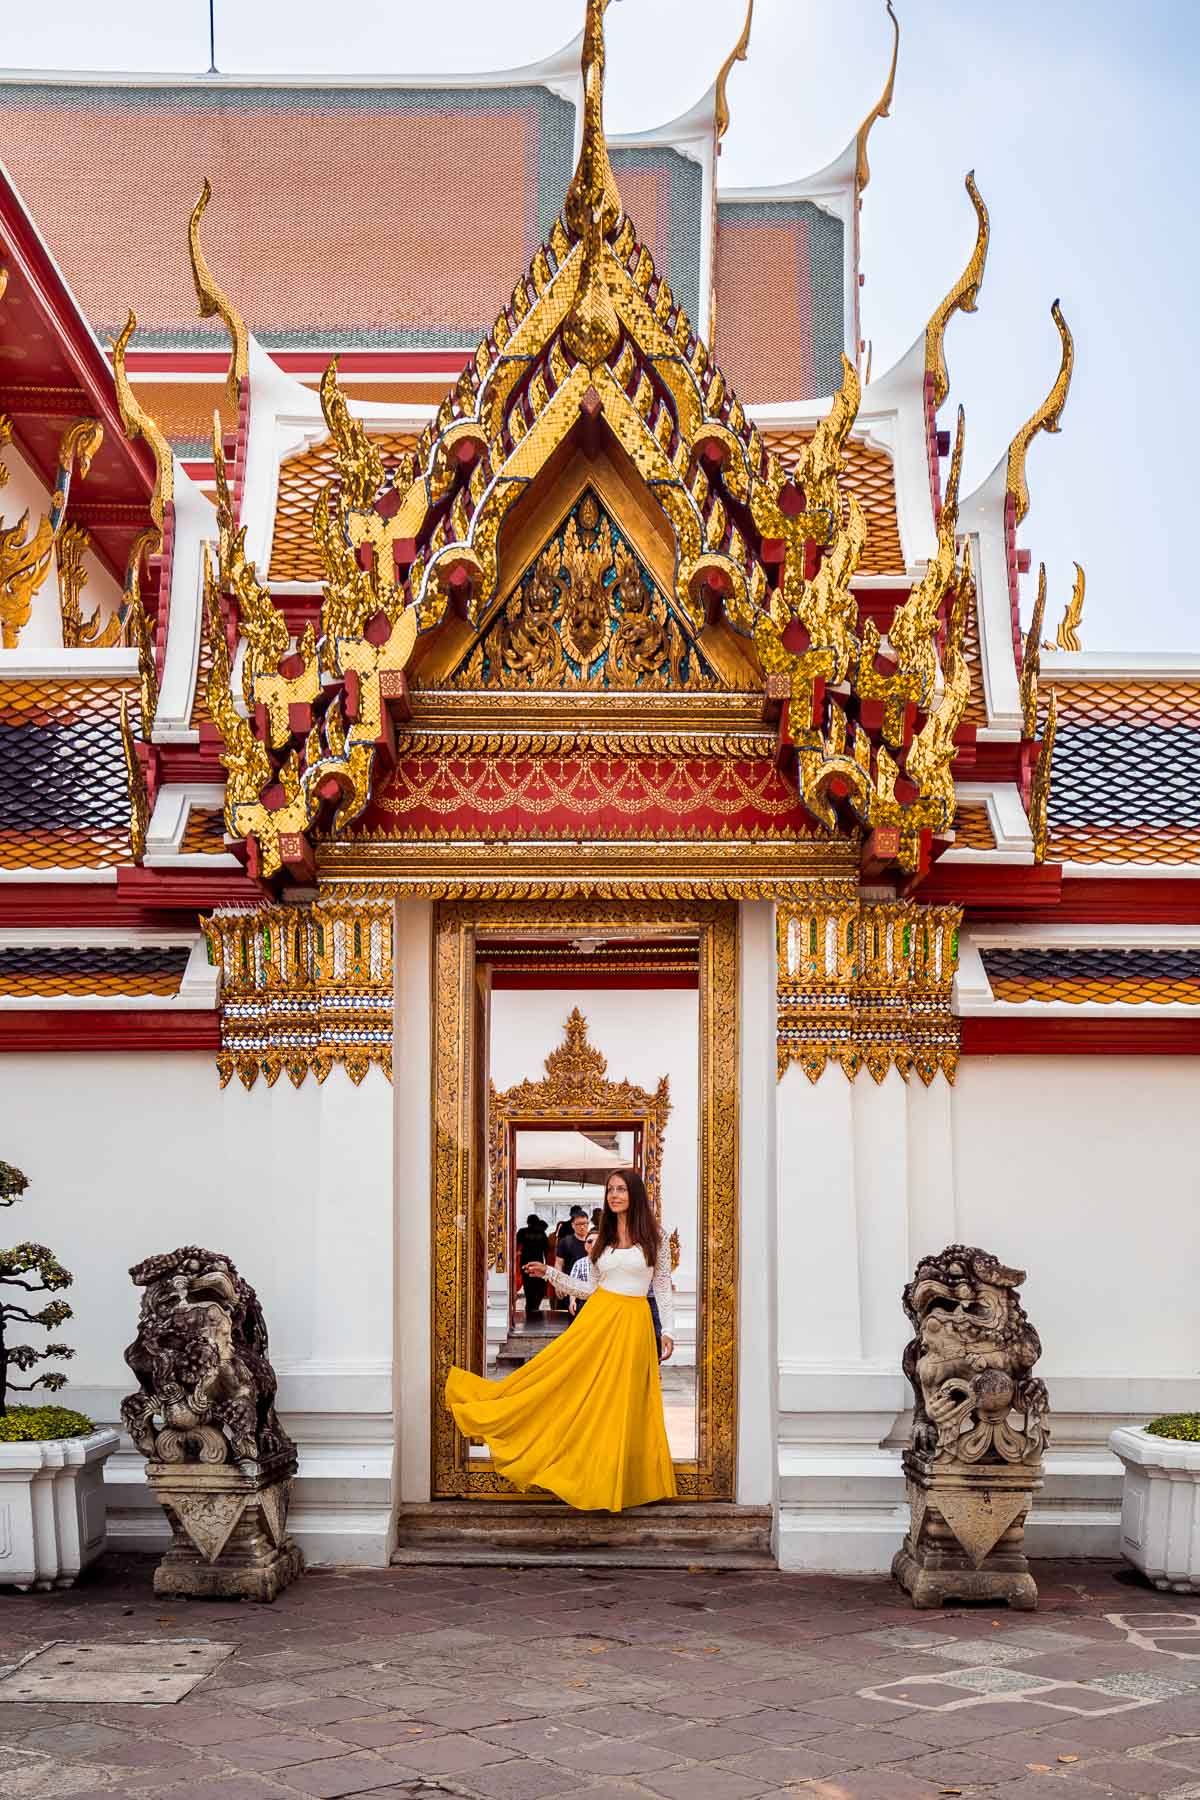 Girl in a yellow dress standing inside the Wat Pho in Bangkok